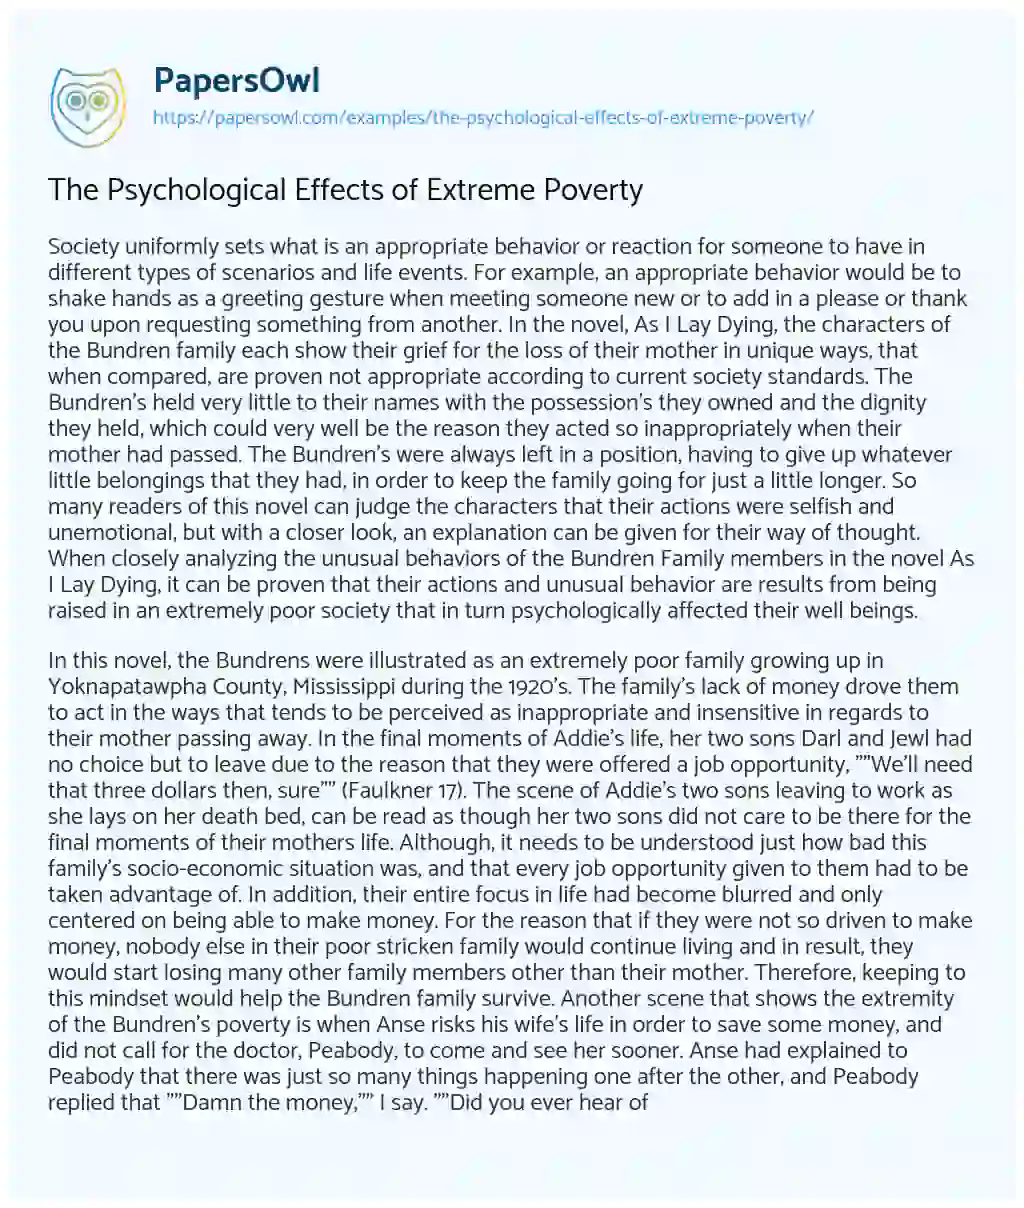 Essay on The Psychological Effects of Extreme Poverty